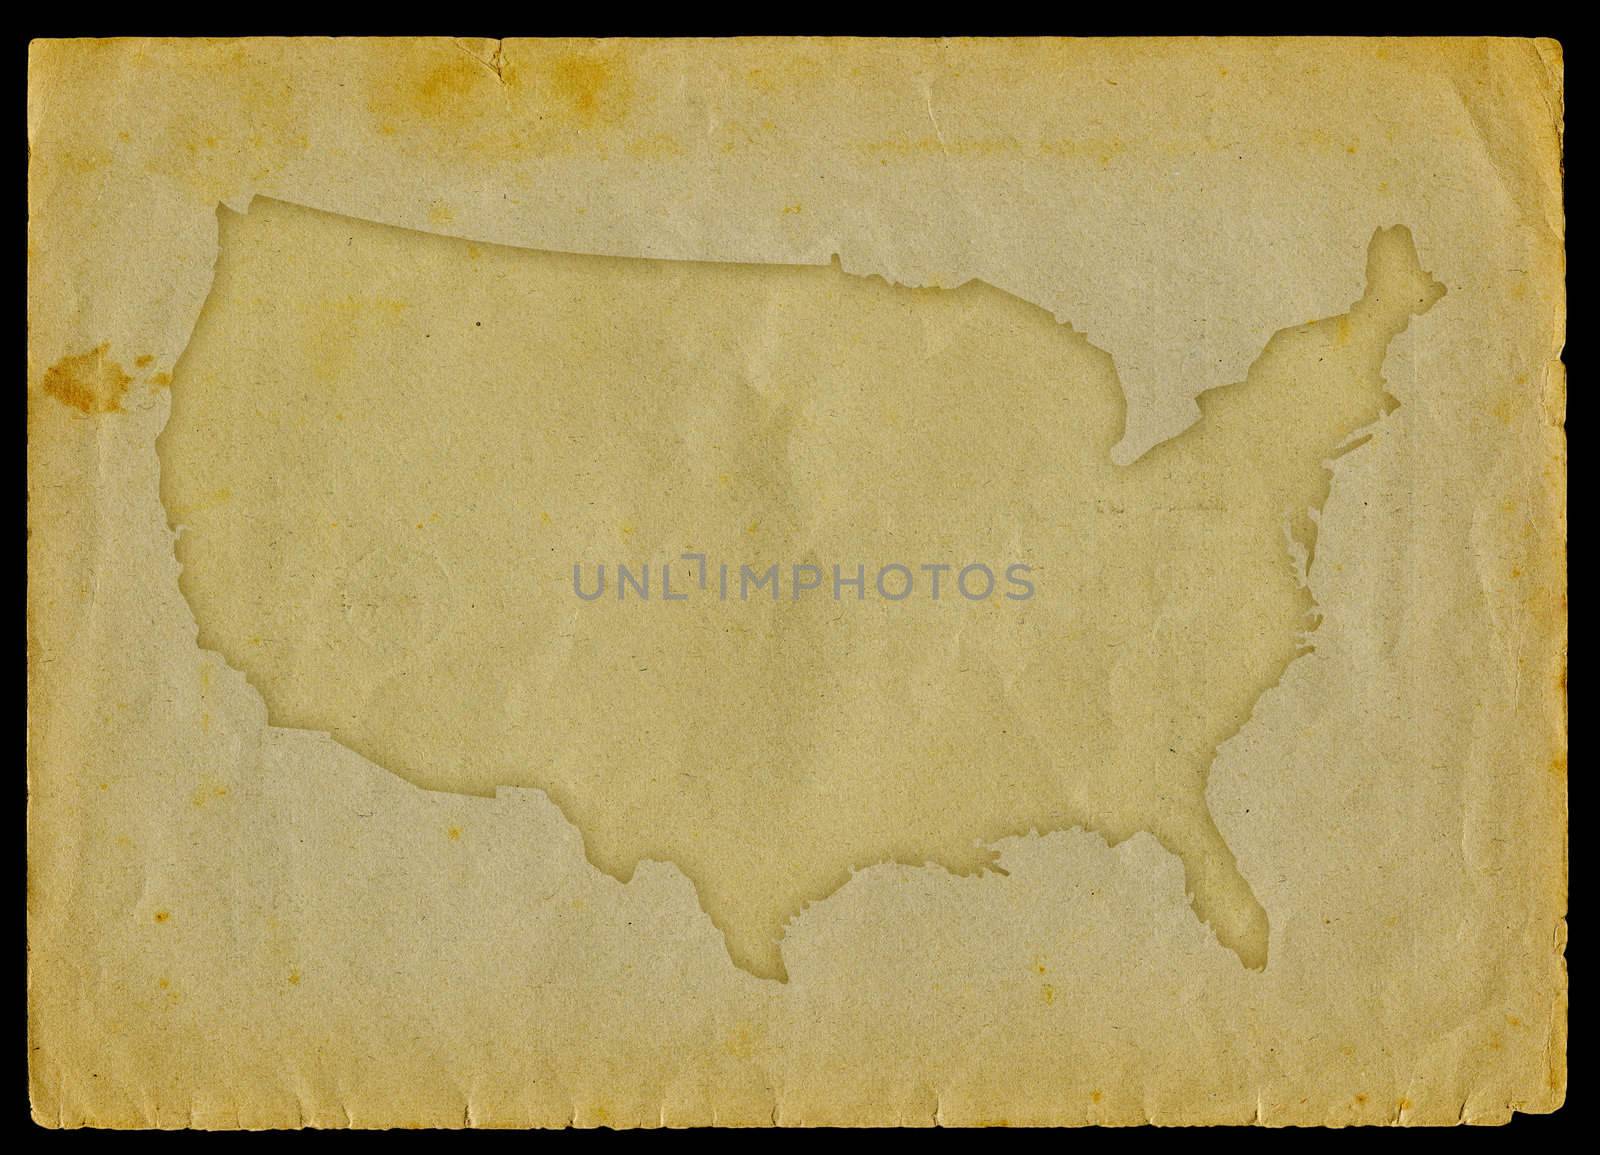 Usa map engraved on a old paper page.
Clipping path of the map is included

the source of the image was taken from: 
http://www.lib.utexas.edu/maps/united_states/united_states_pol02.pdf